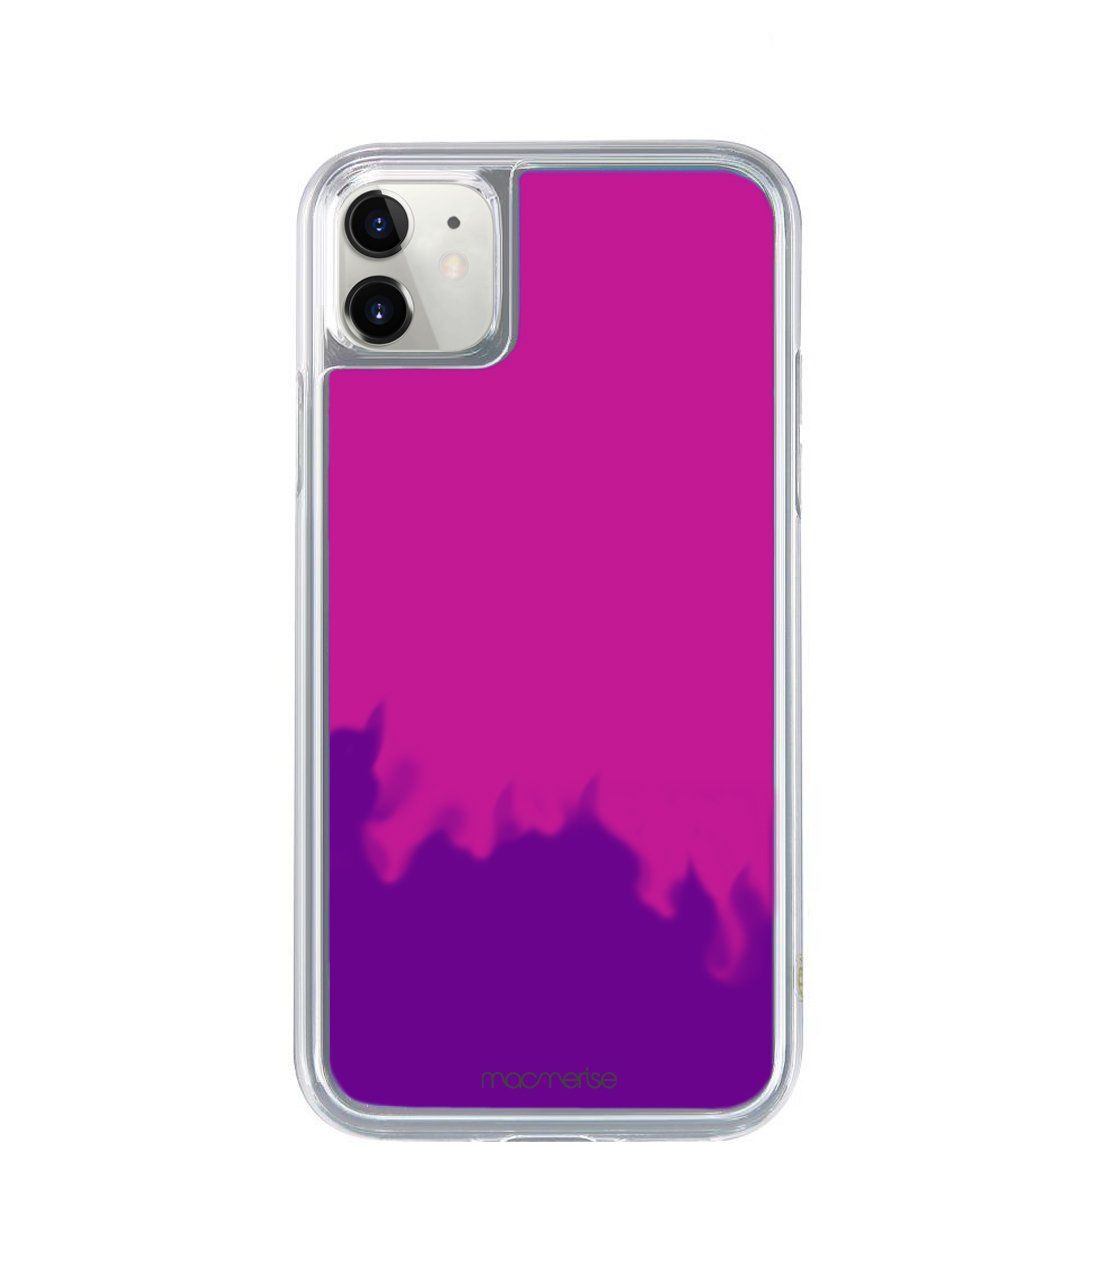 Neon Sand Purple Pink - Neon Sand Phone Case for iPhone 11